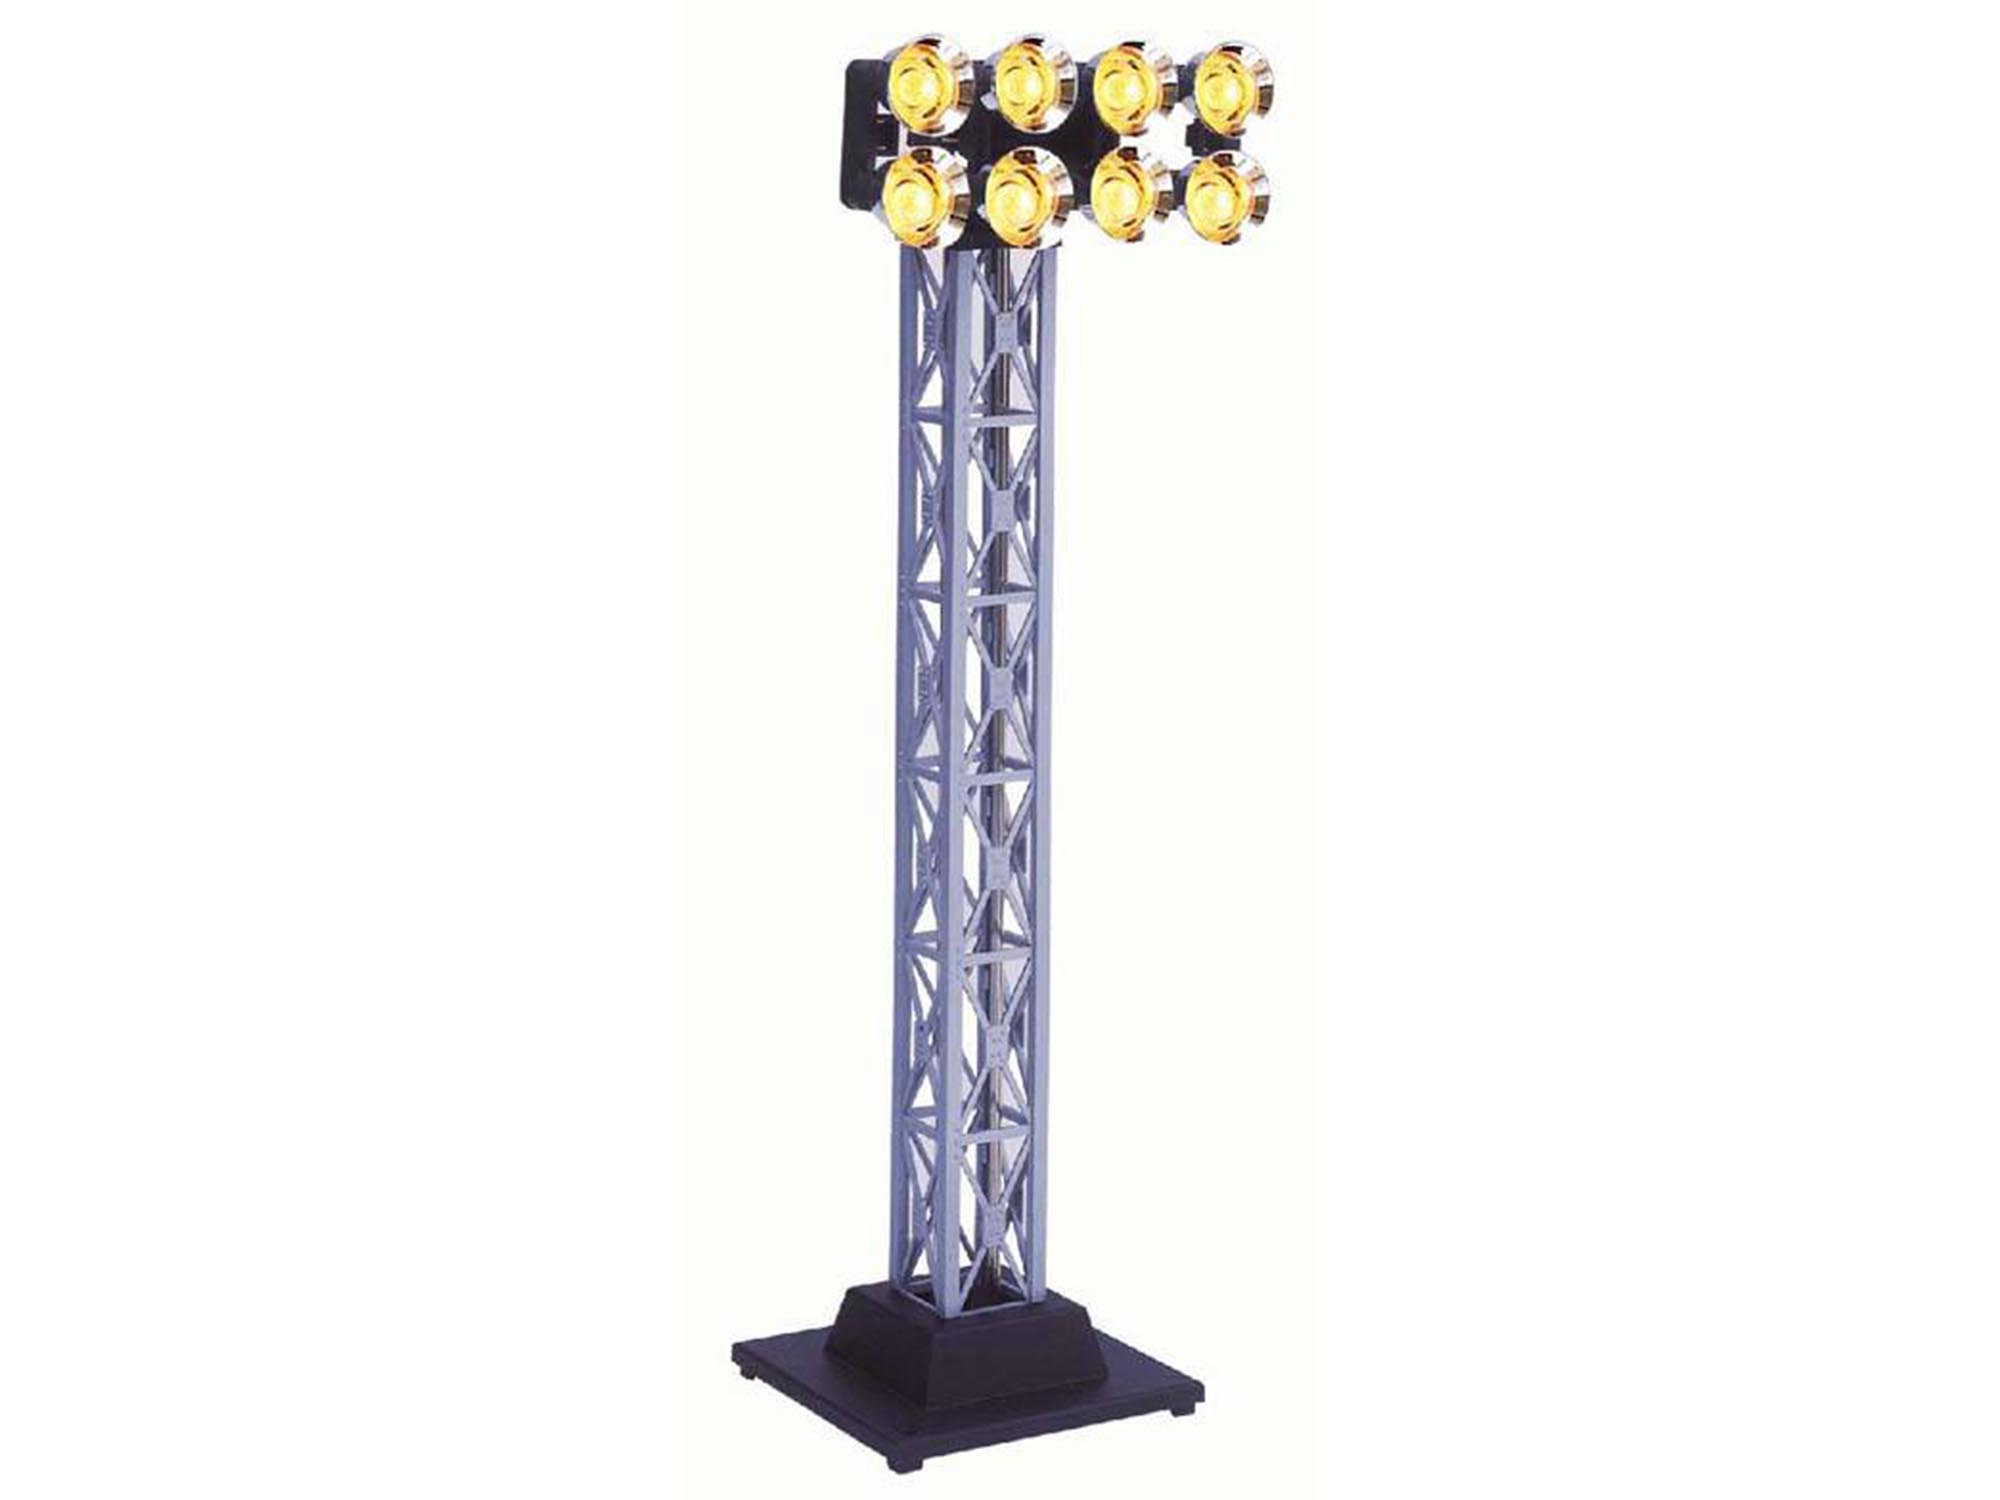 Lionel 395 Repro Floodlight Tower 6-12886 for sale online 